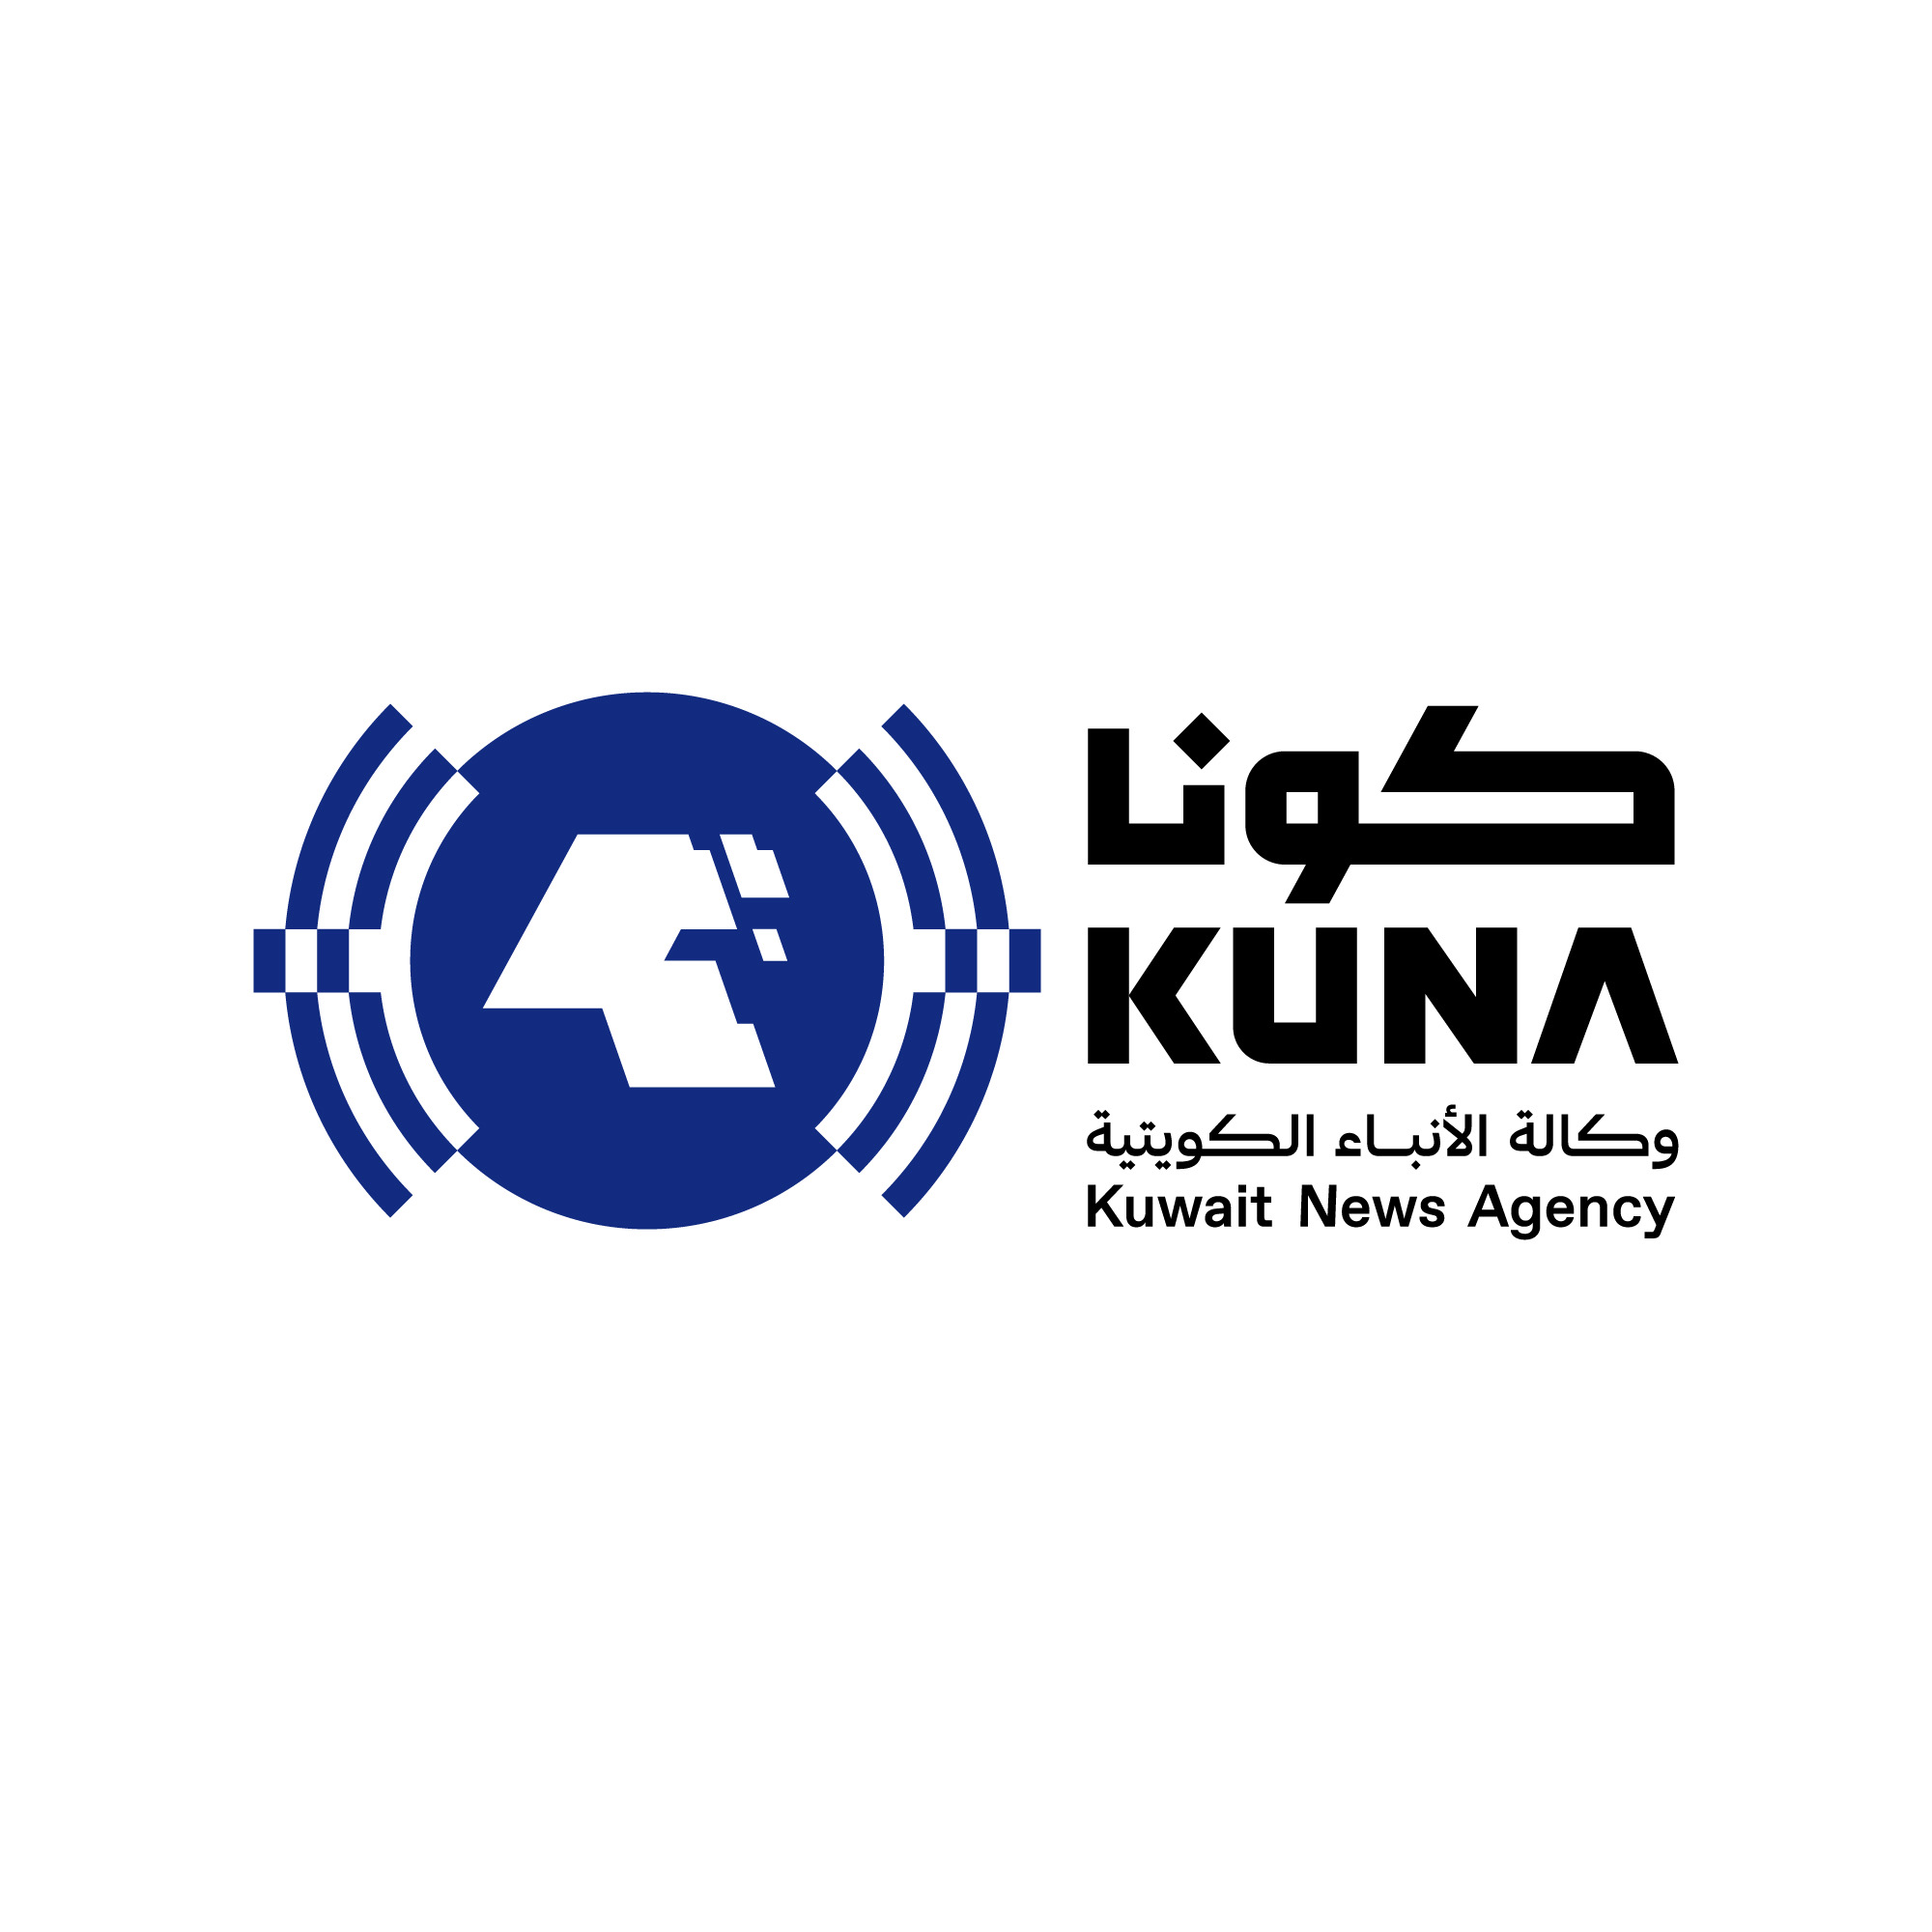 Briefing of KUNA main news for Monday until 12:00 GMT